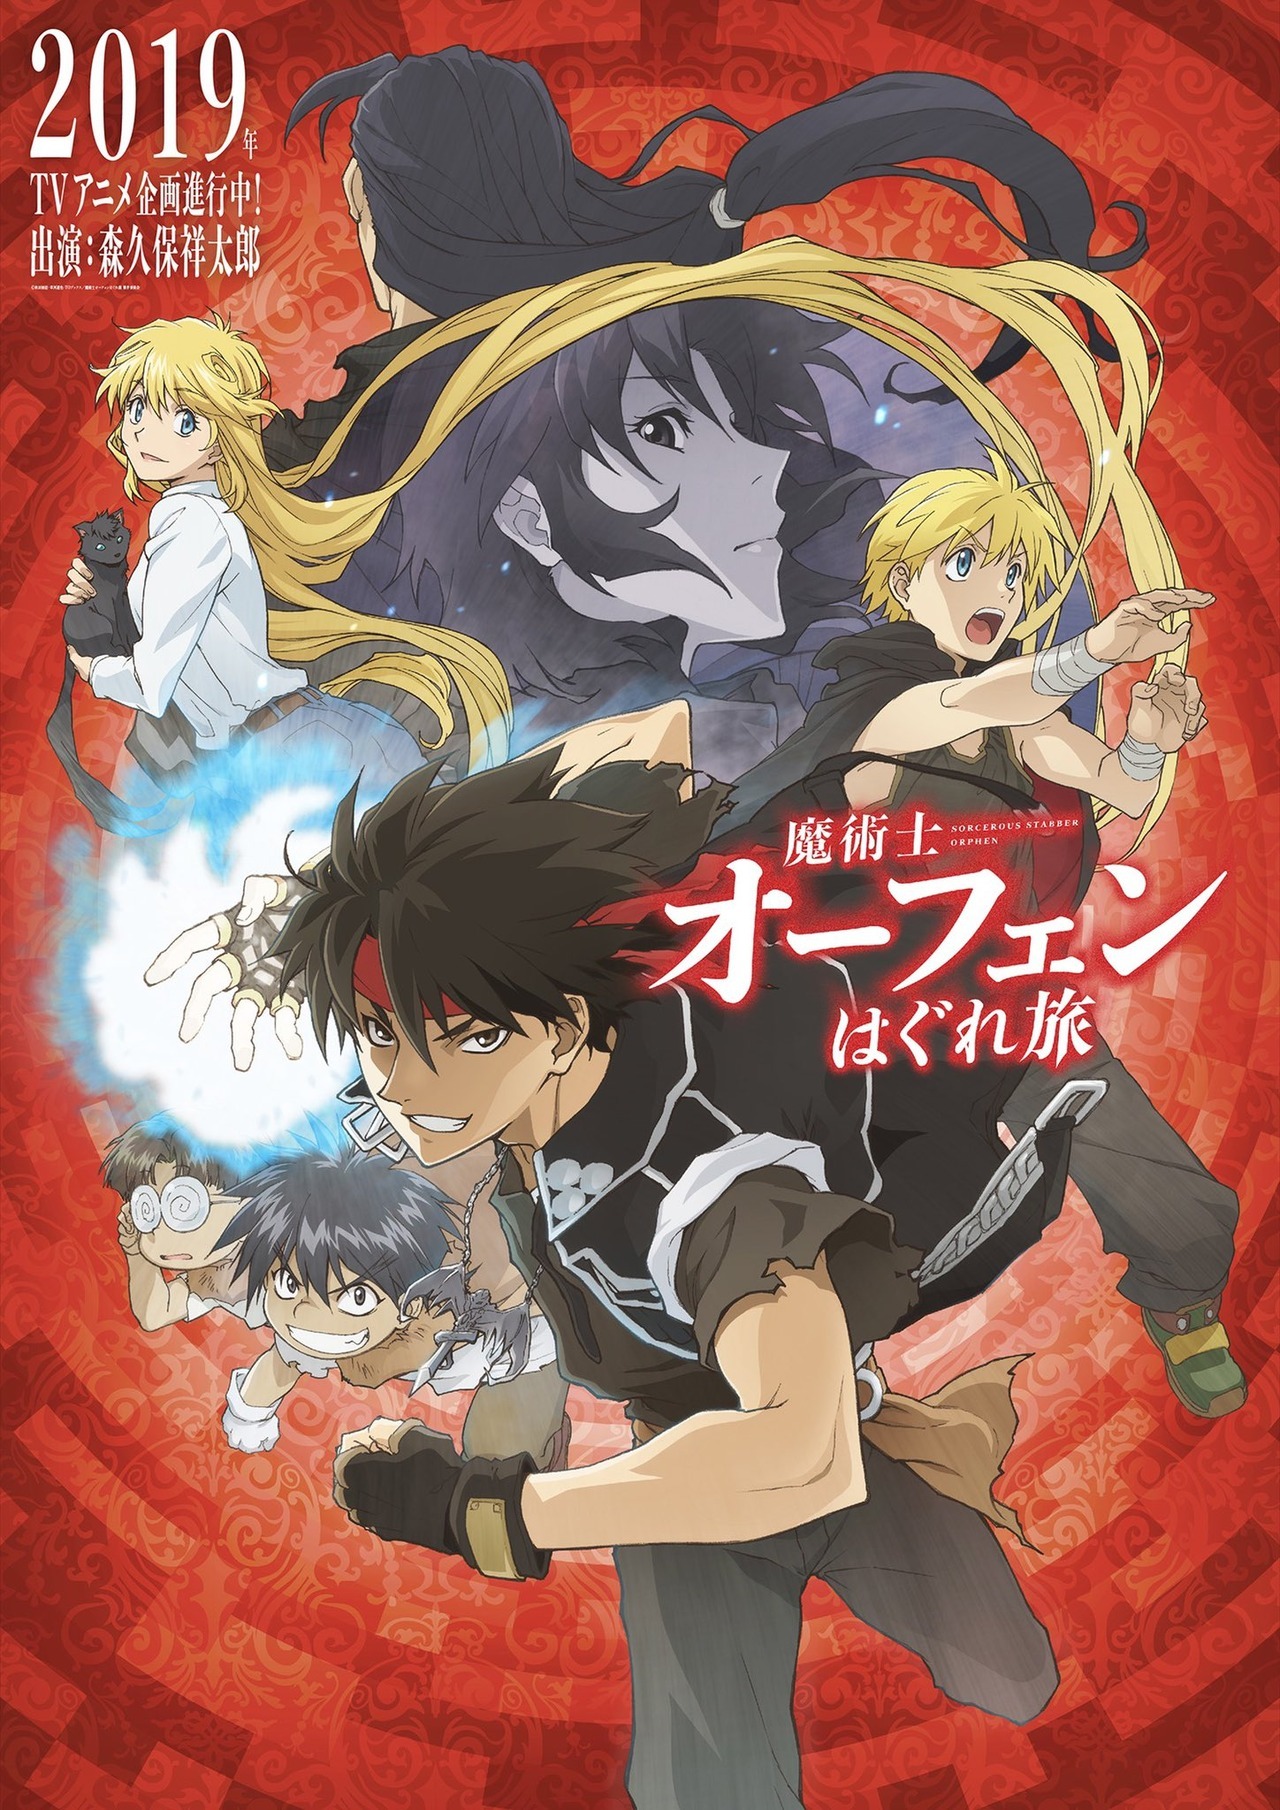 Key visual for the new âSorcerous Stabber Orphenâ TV anime project. Showtaro Morikubo will reprise his role as Orphen. Coming 2019.